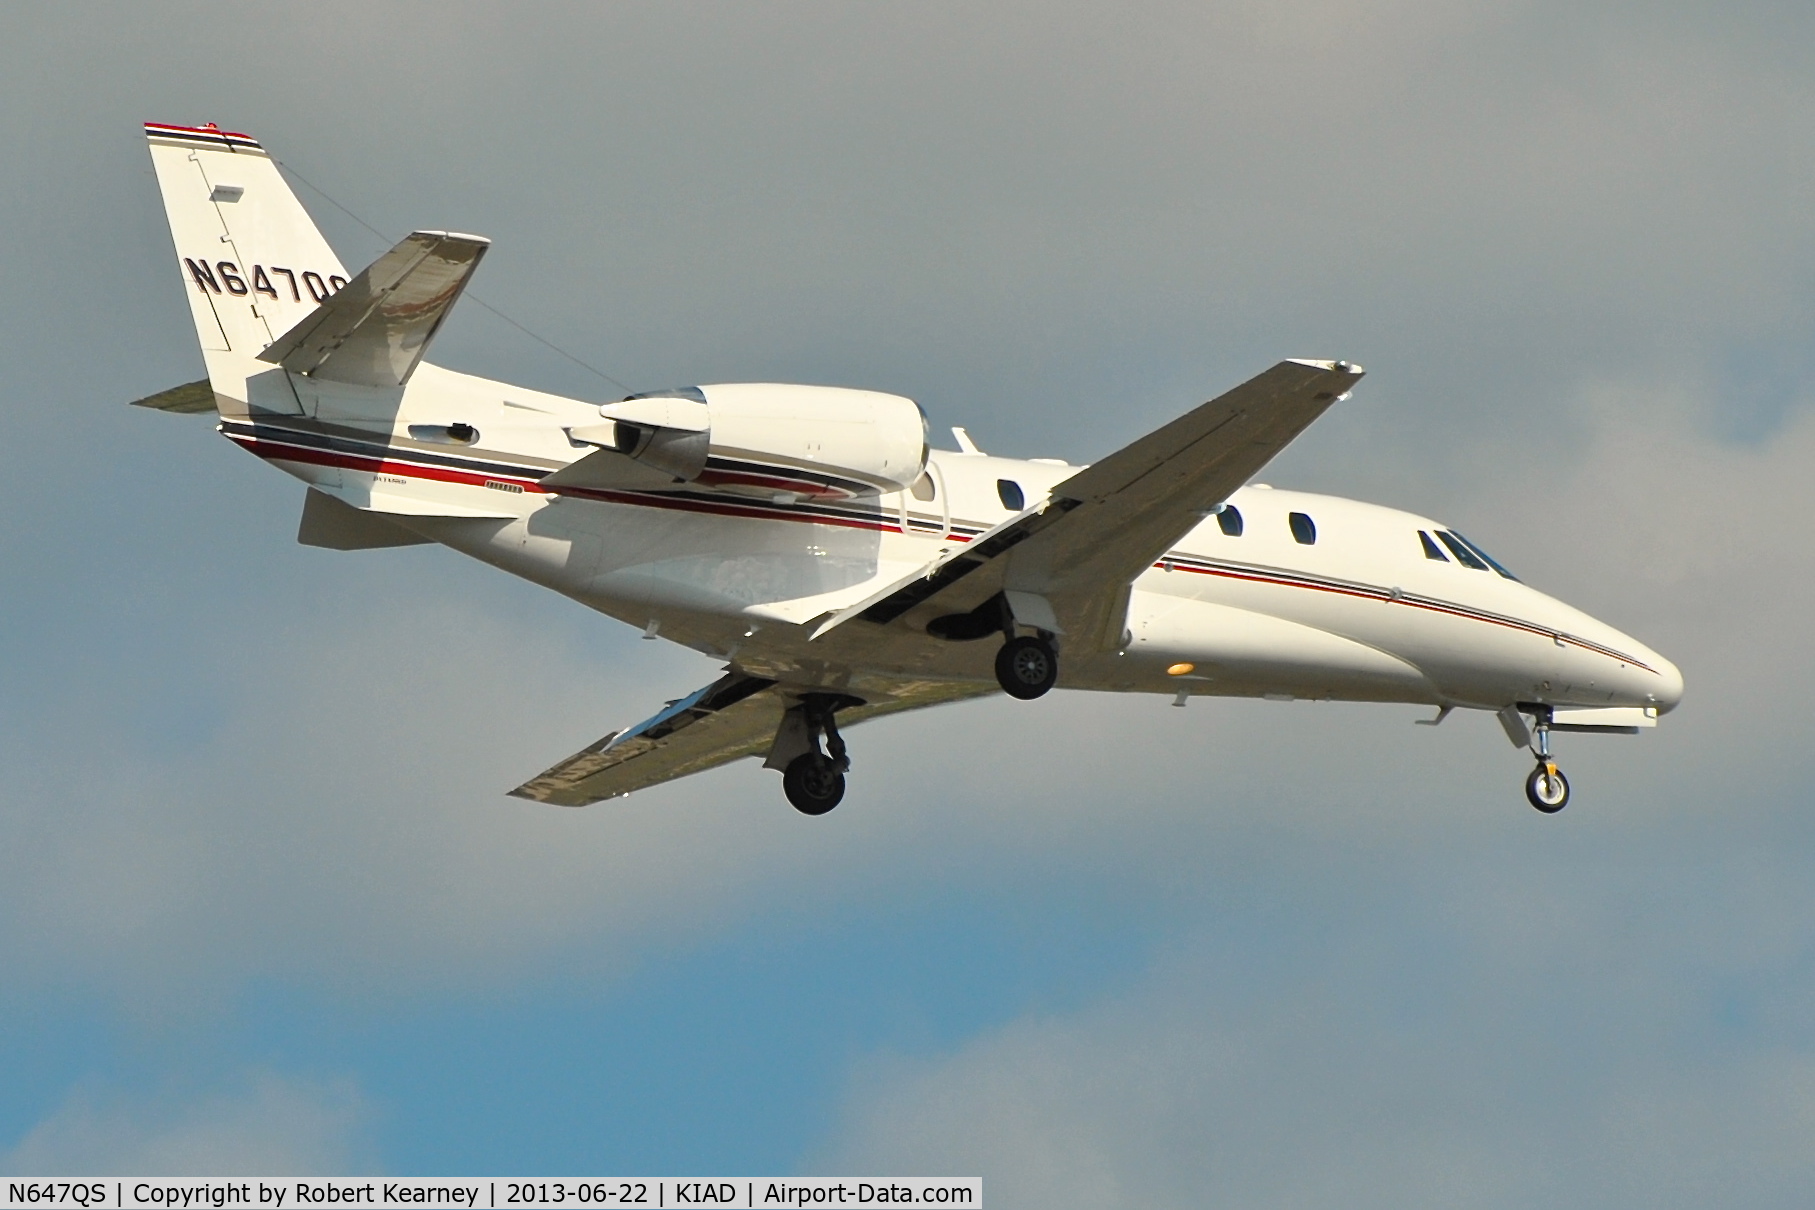 N647QS, 2005 Cessna 560XL C/N 560-5547, On finals for r/w 19L